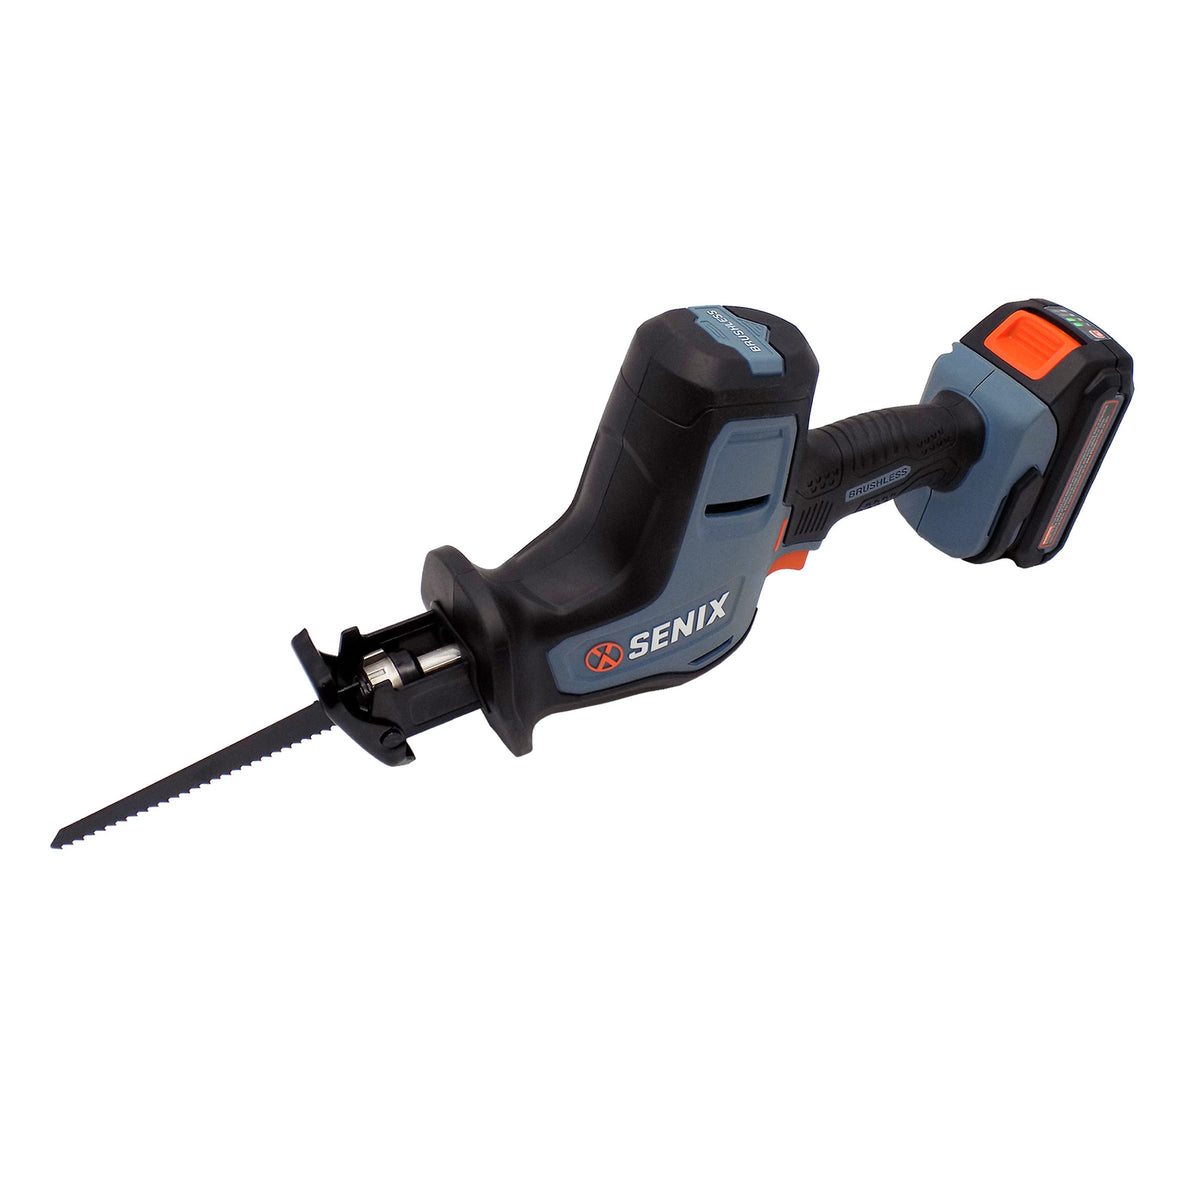 20 Volt Max* 7/8-Inch Brushless Reciprocating Saw (Battery and Charger –  SENIX Tools